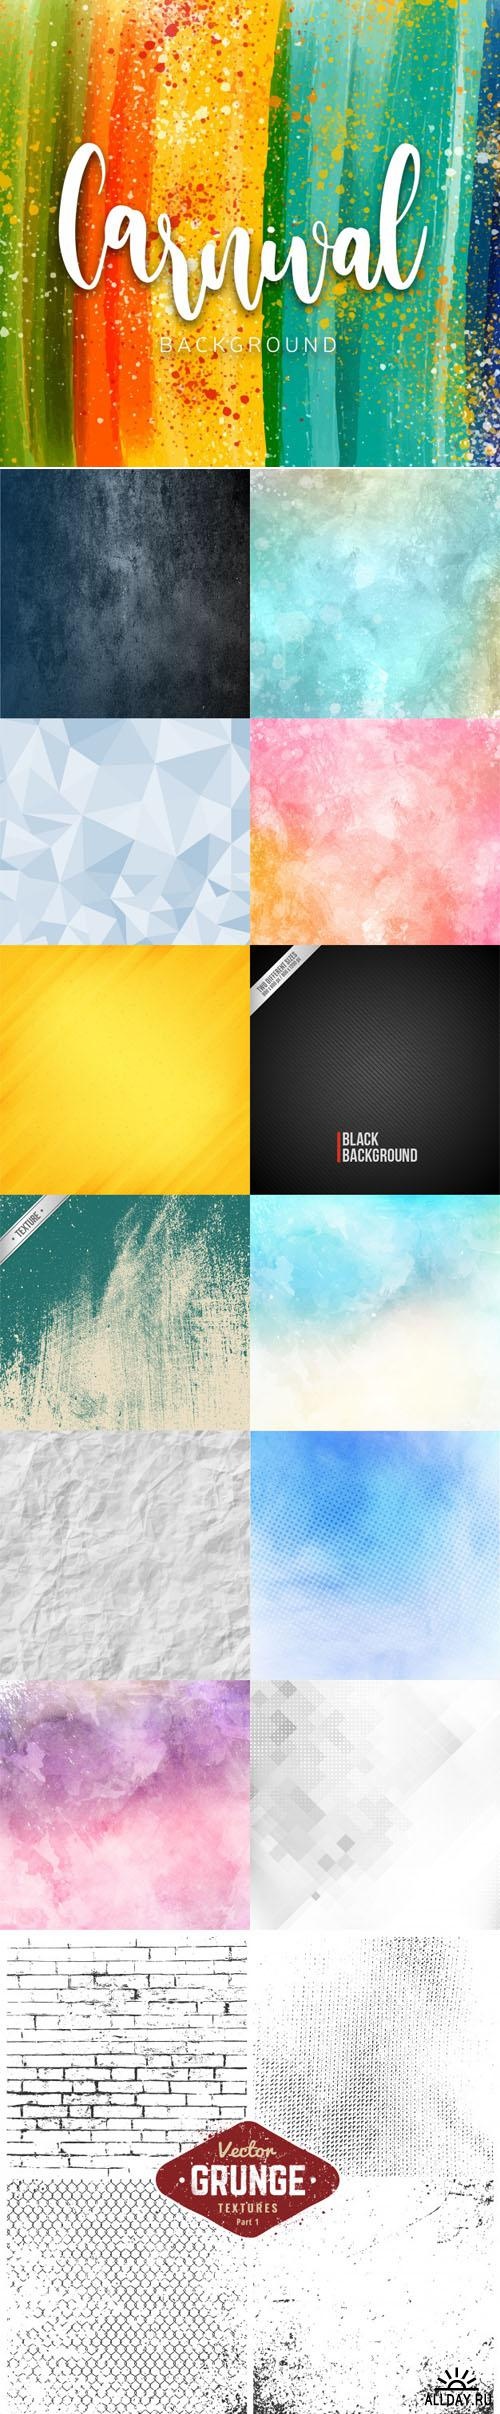 14 Textures Backgrounds Vector ((eps ((ai (5 files)